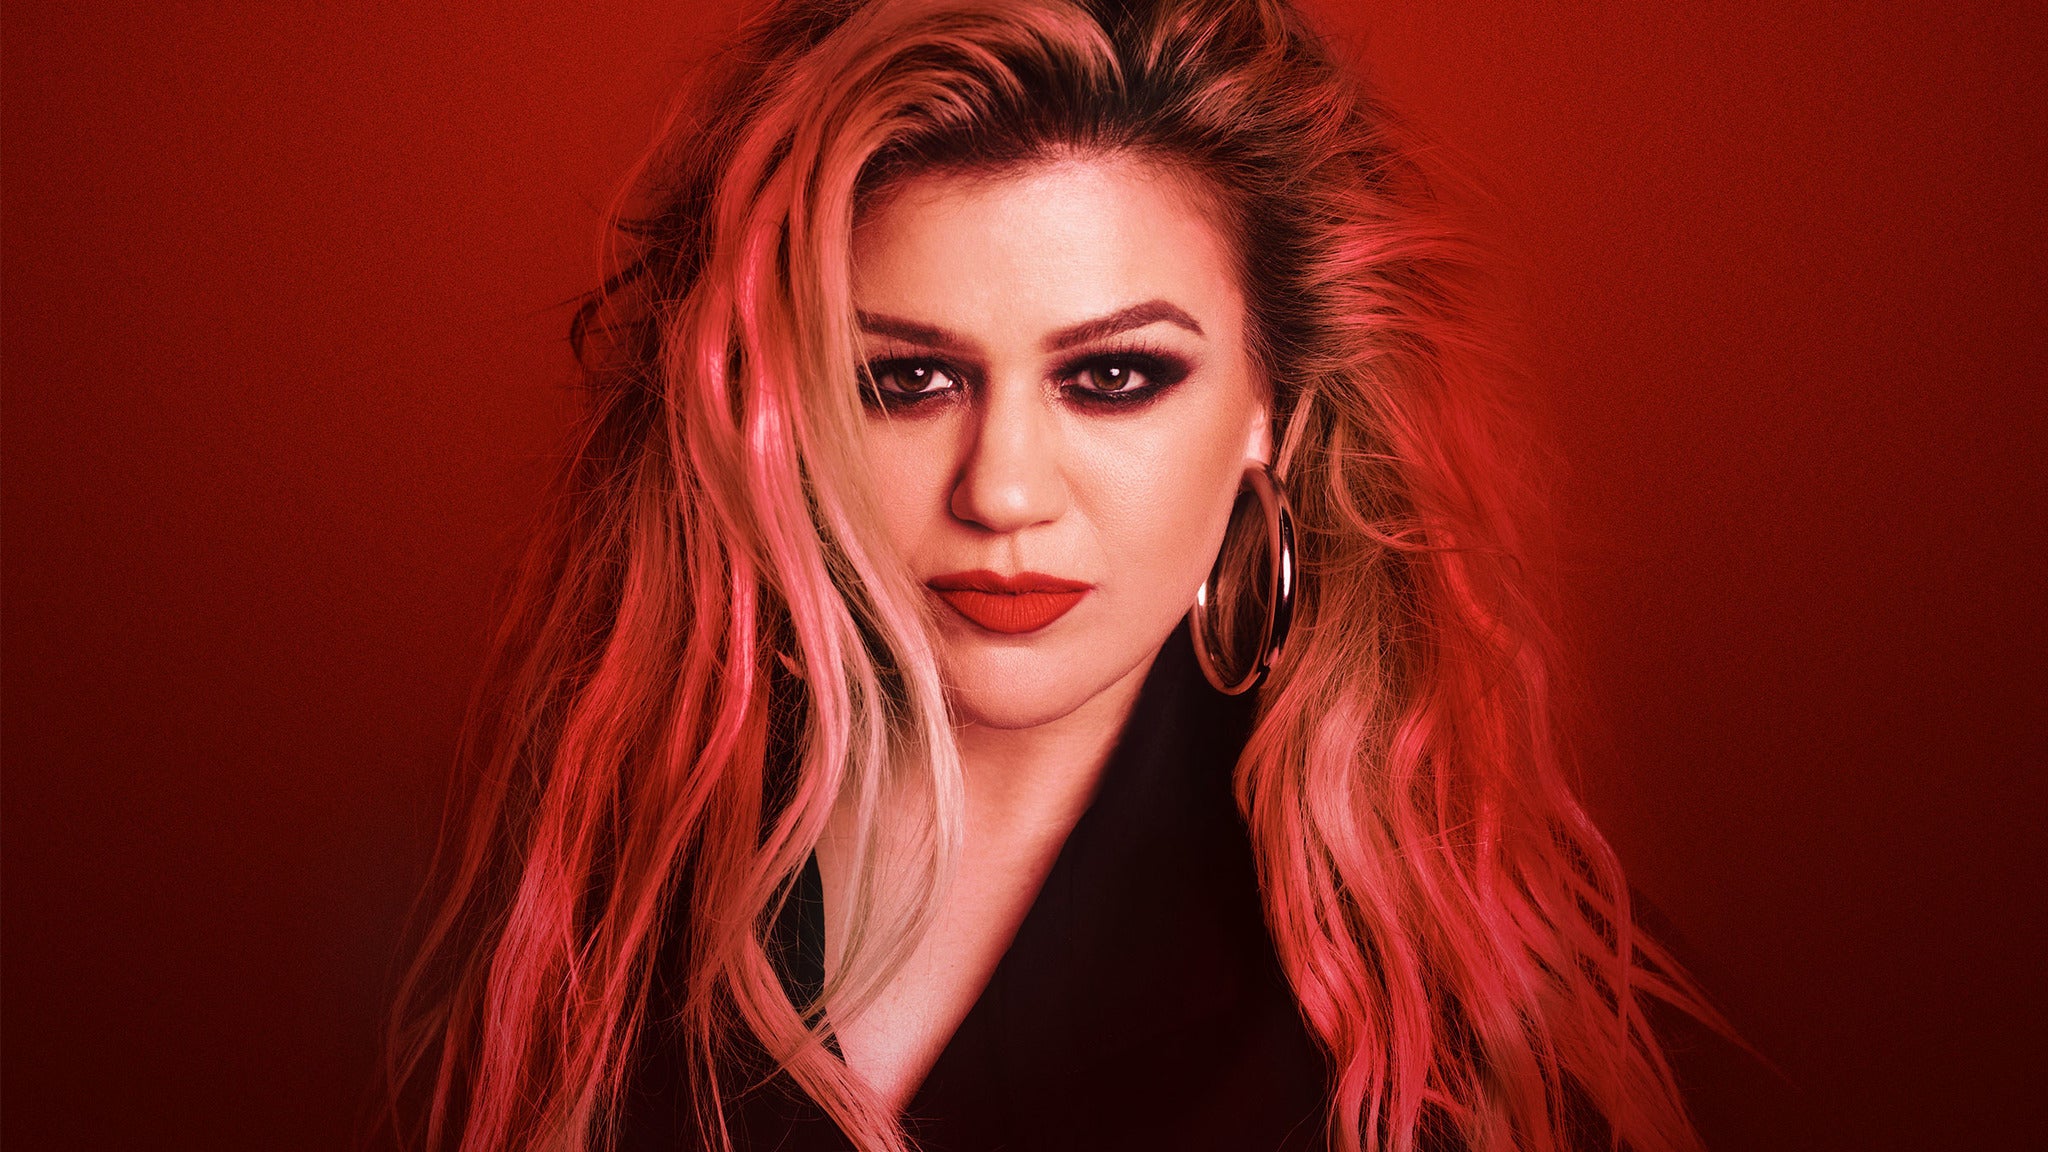 See Kelly Clarkson's Stunning Looks from Her Las Vegas Residency